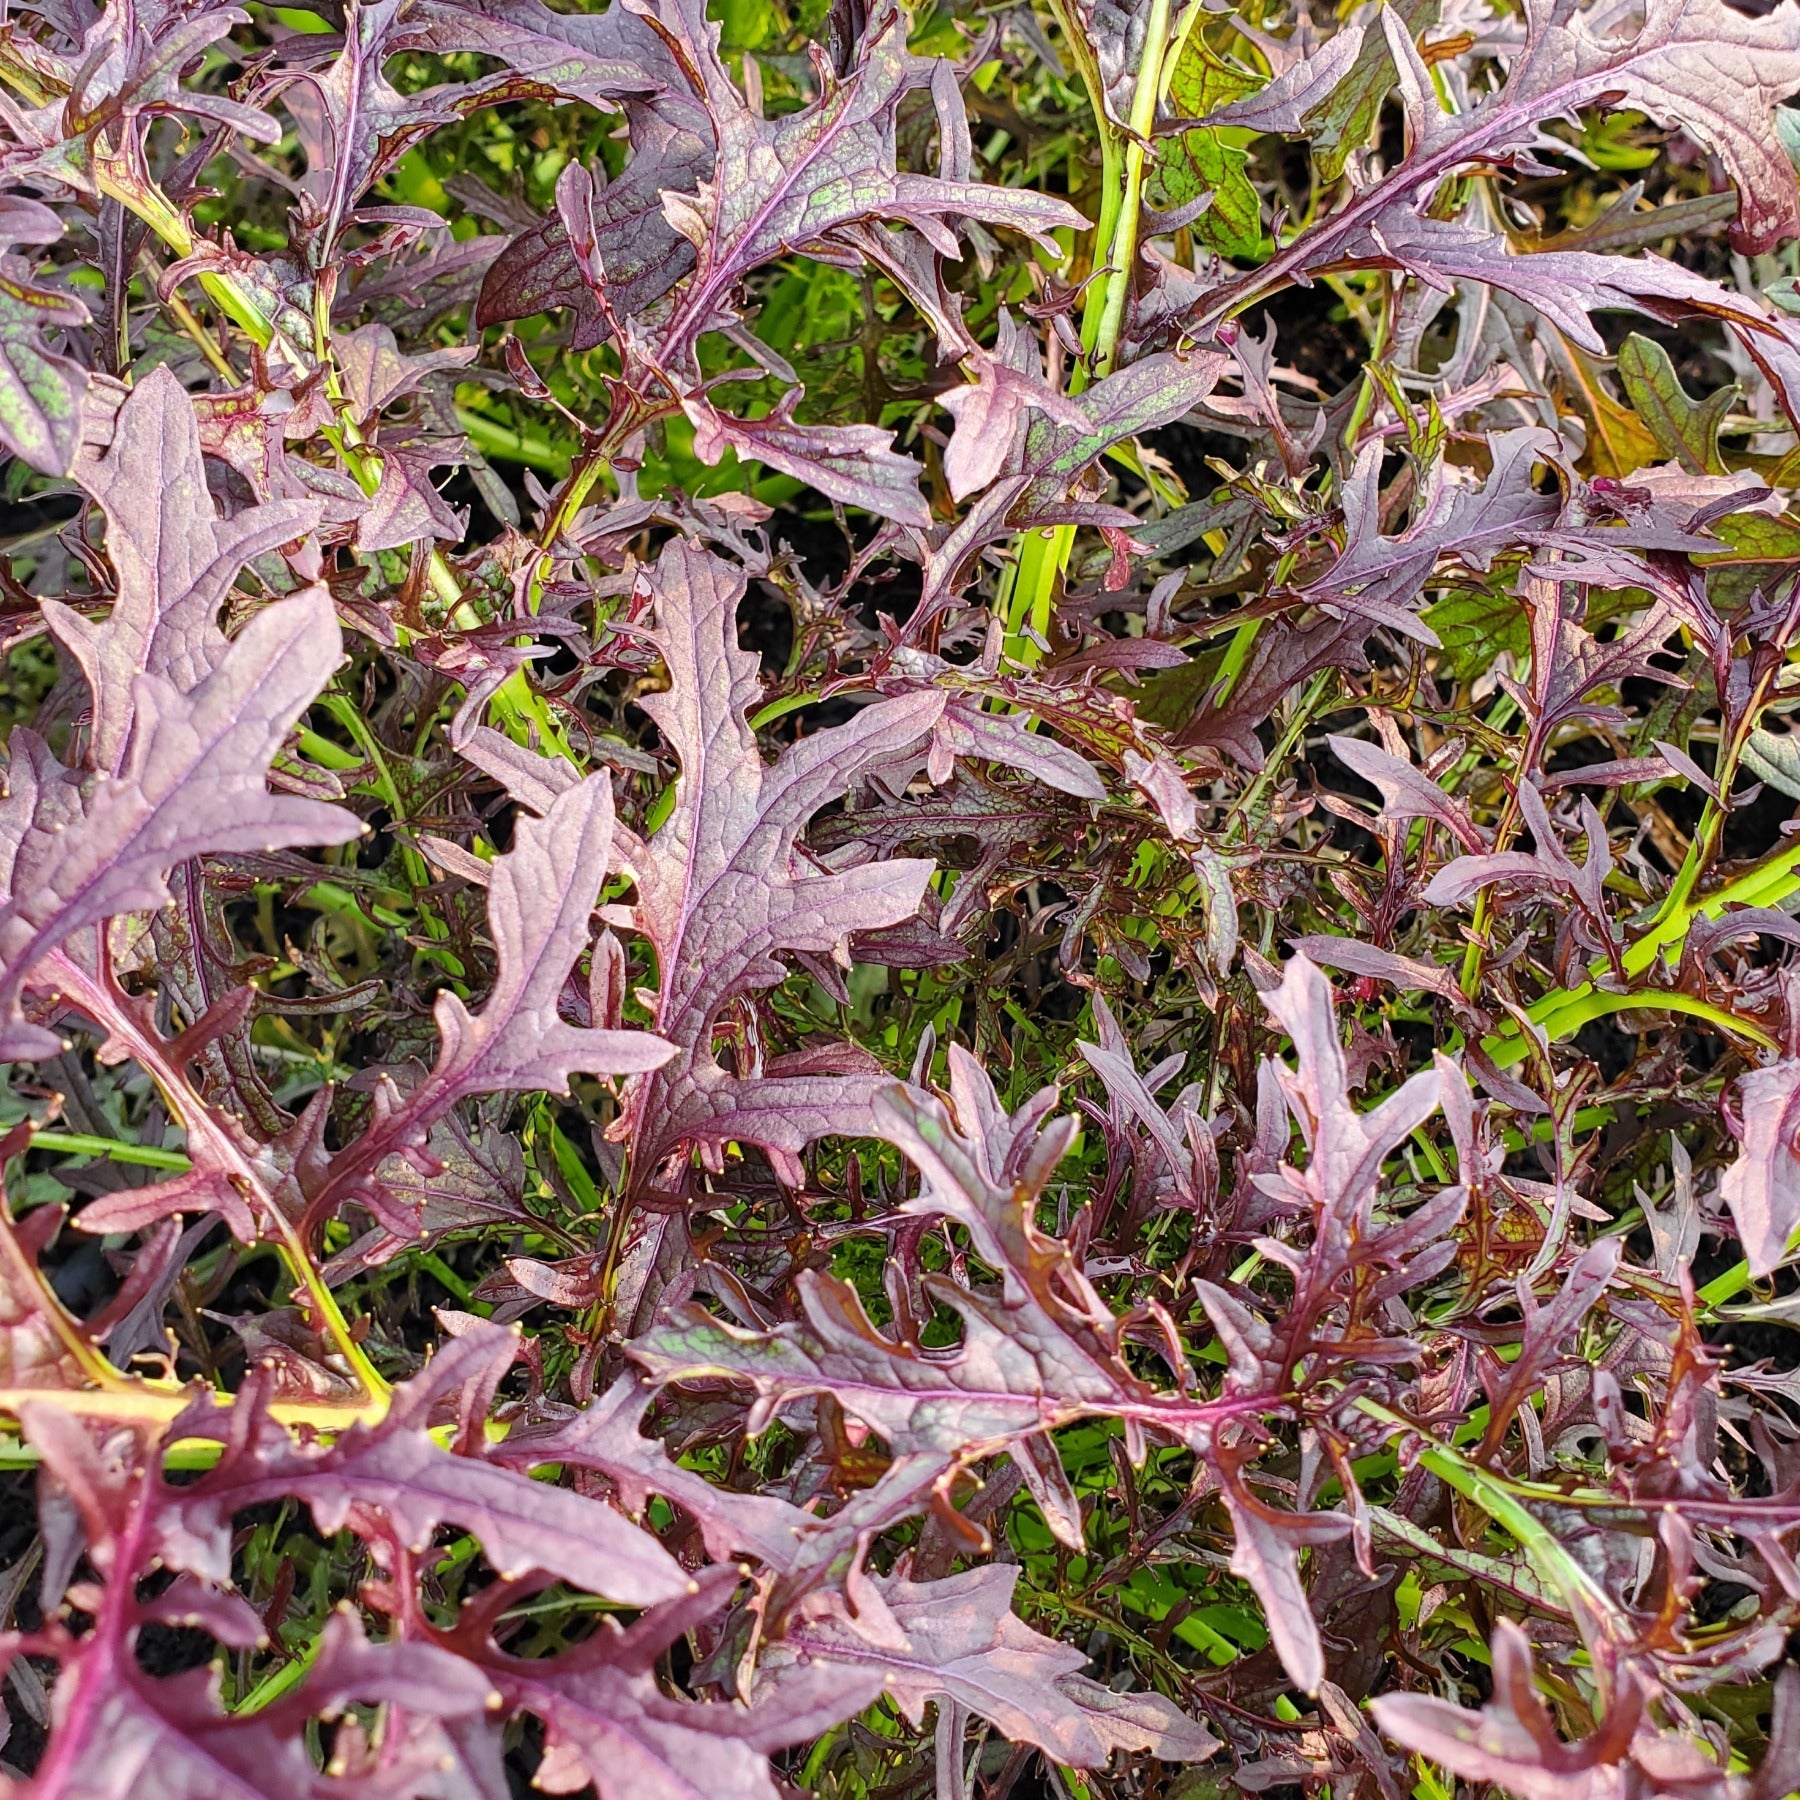 A picture of ruby streaks mustard greens in the garden showcasing the deep red and highly serrated leaves highlighted by green midribs